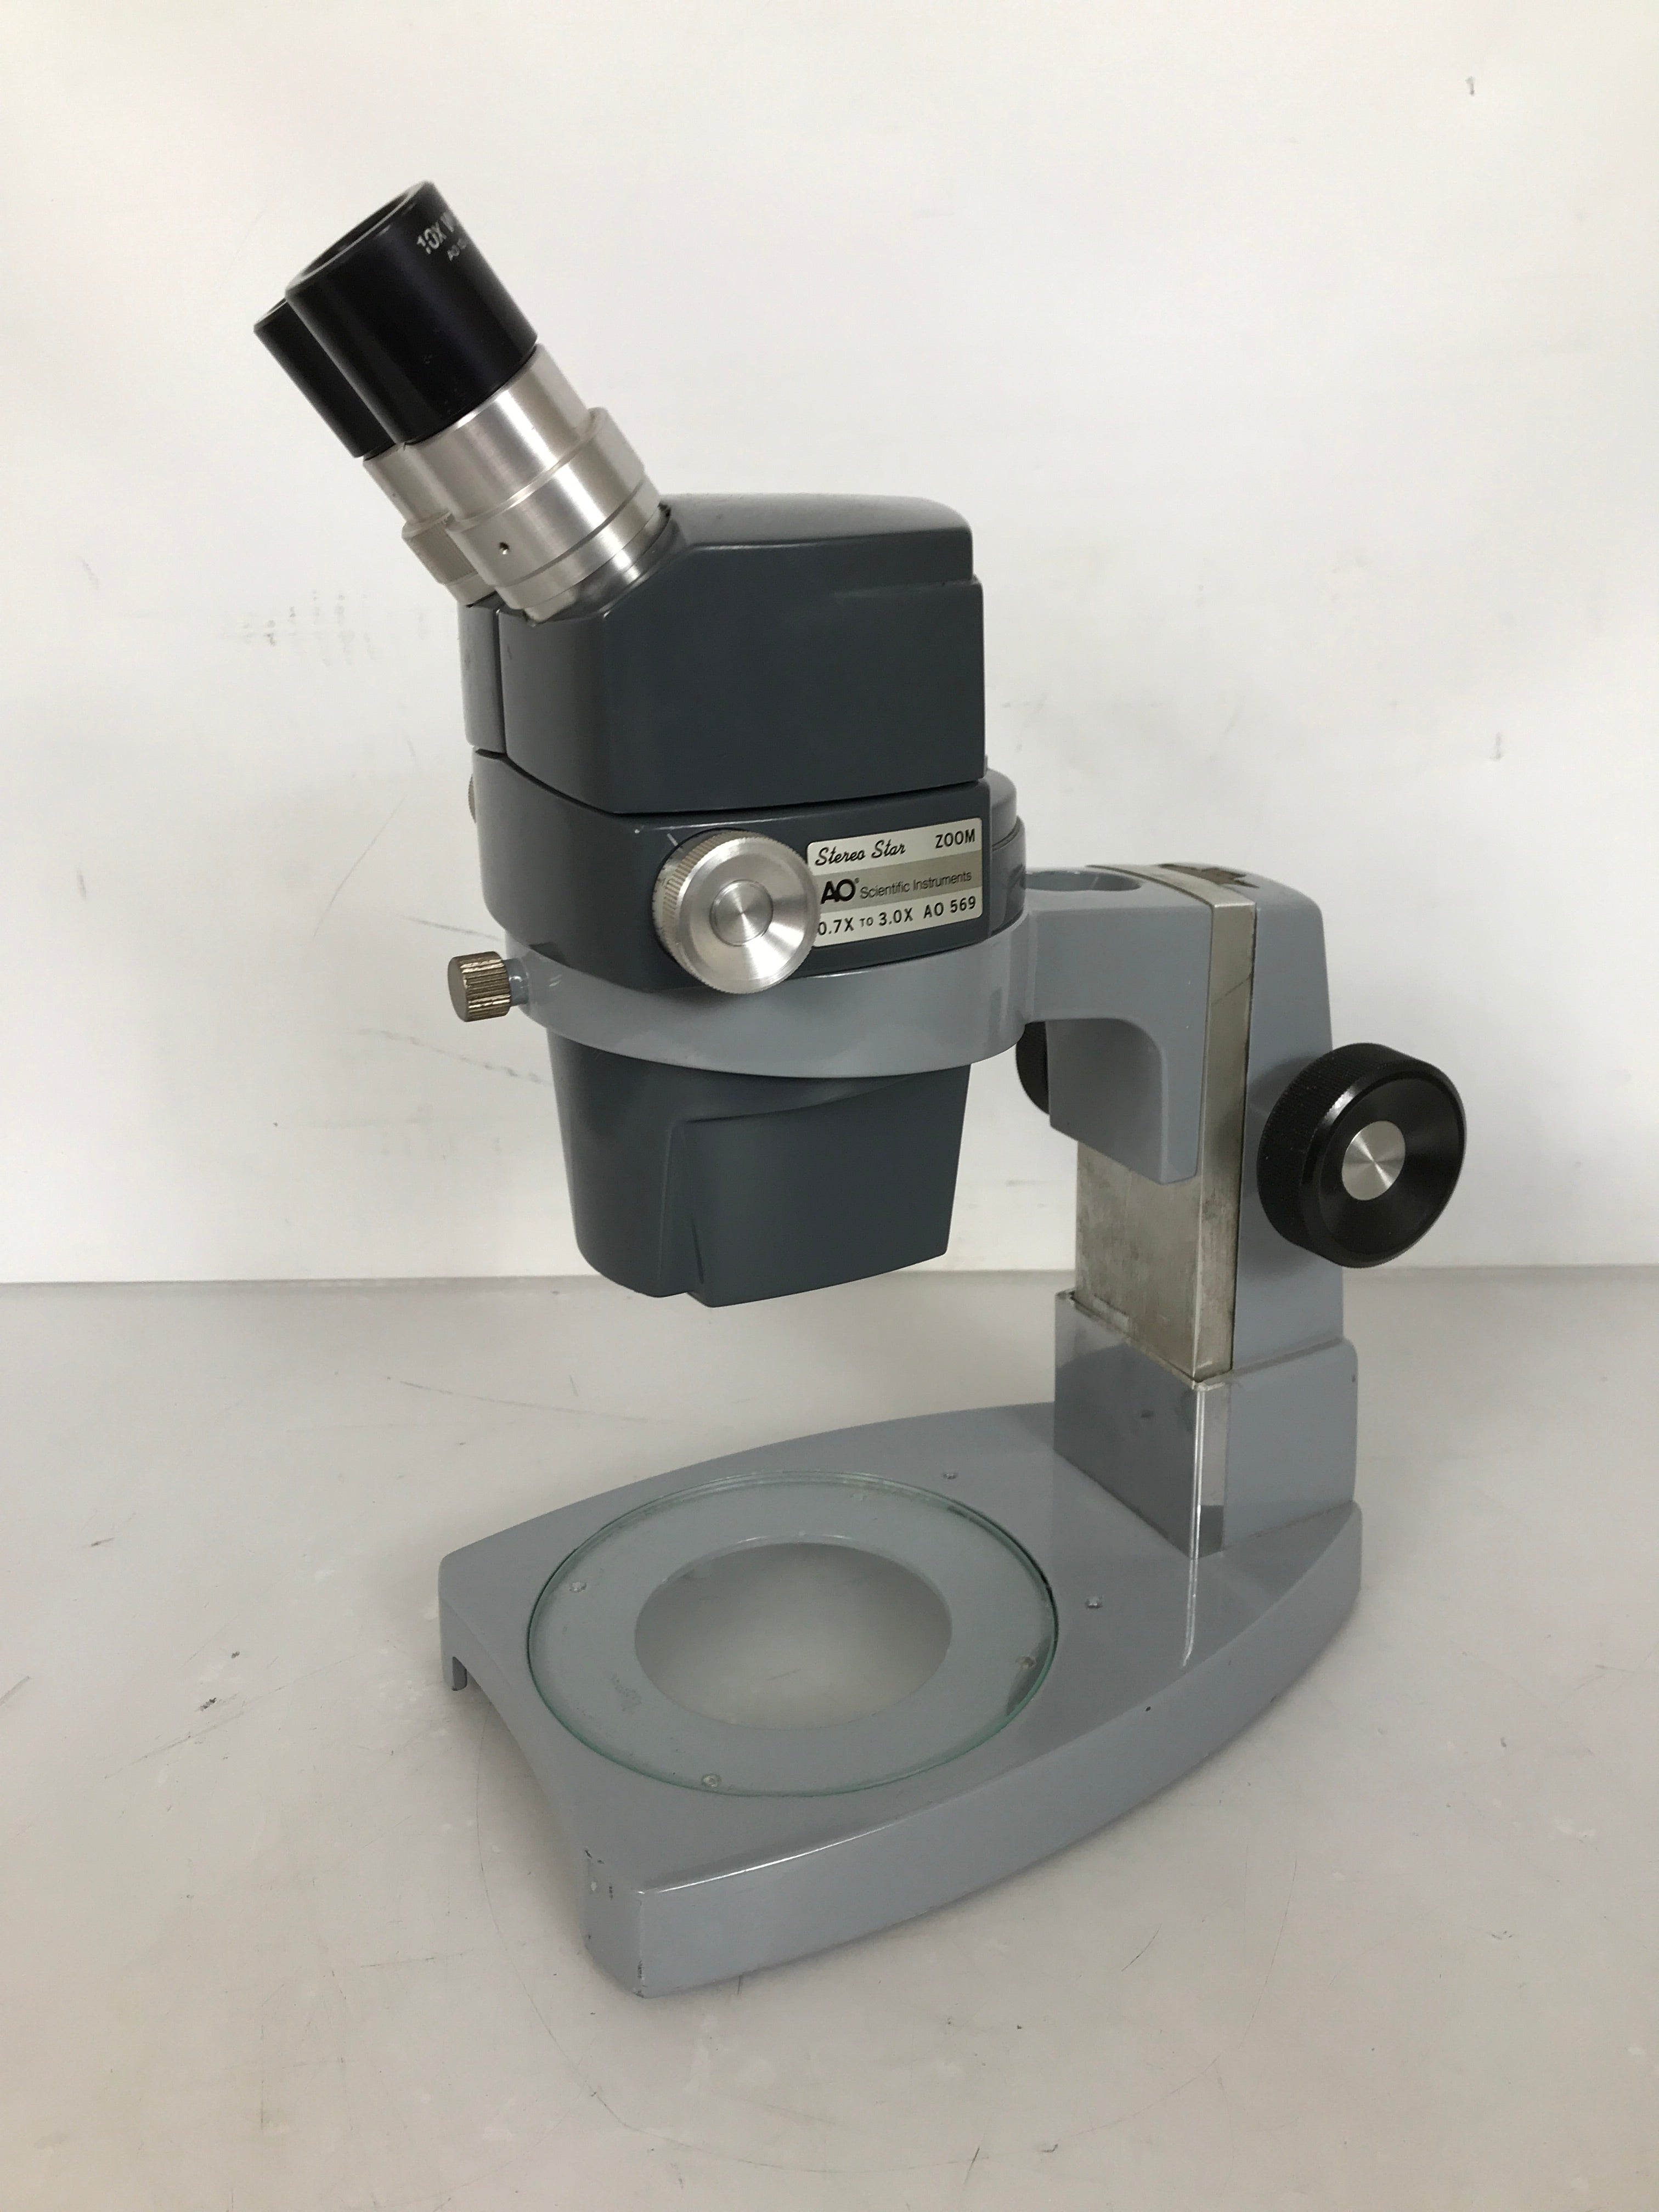 American Optical AO 569 Stereo Star Zoom Microscope 0.7x-3.0x with 10x W.F. Eyepieces